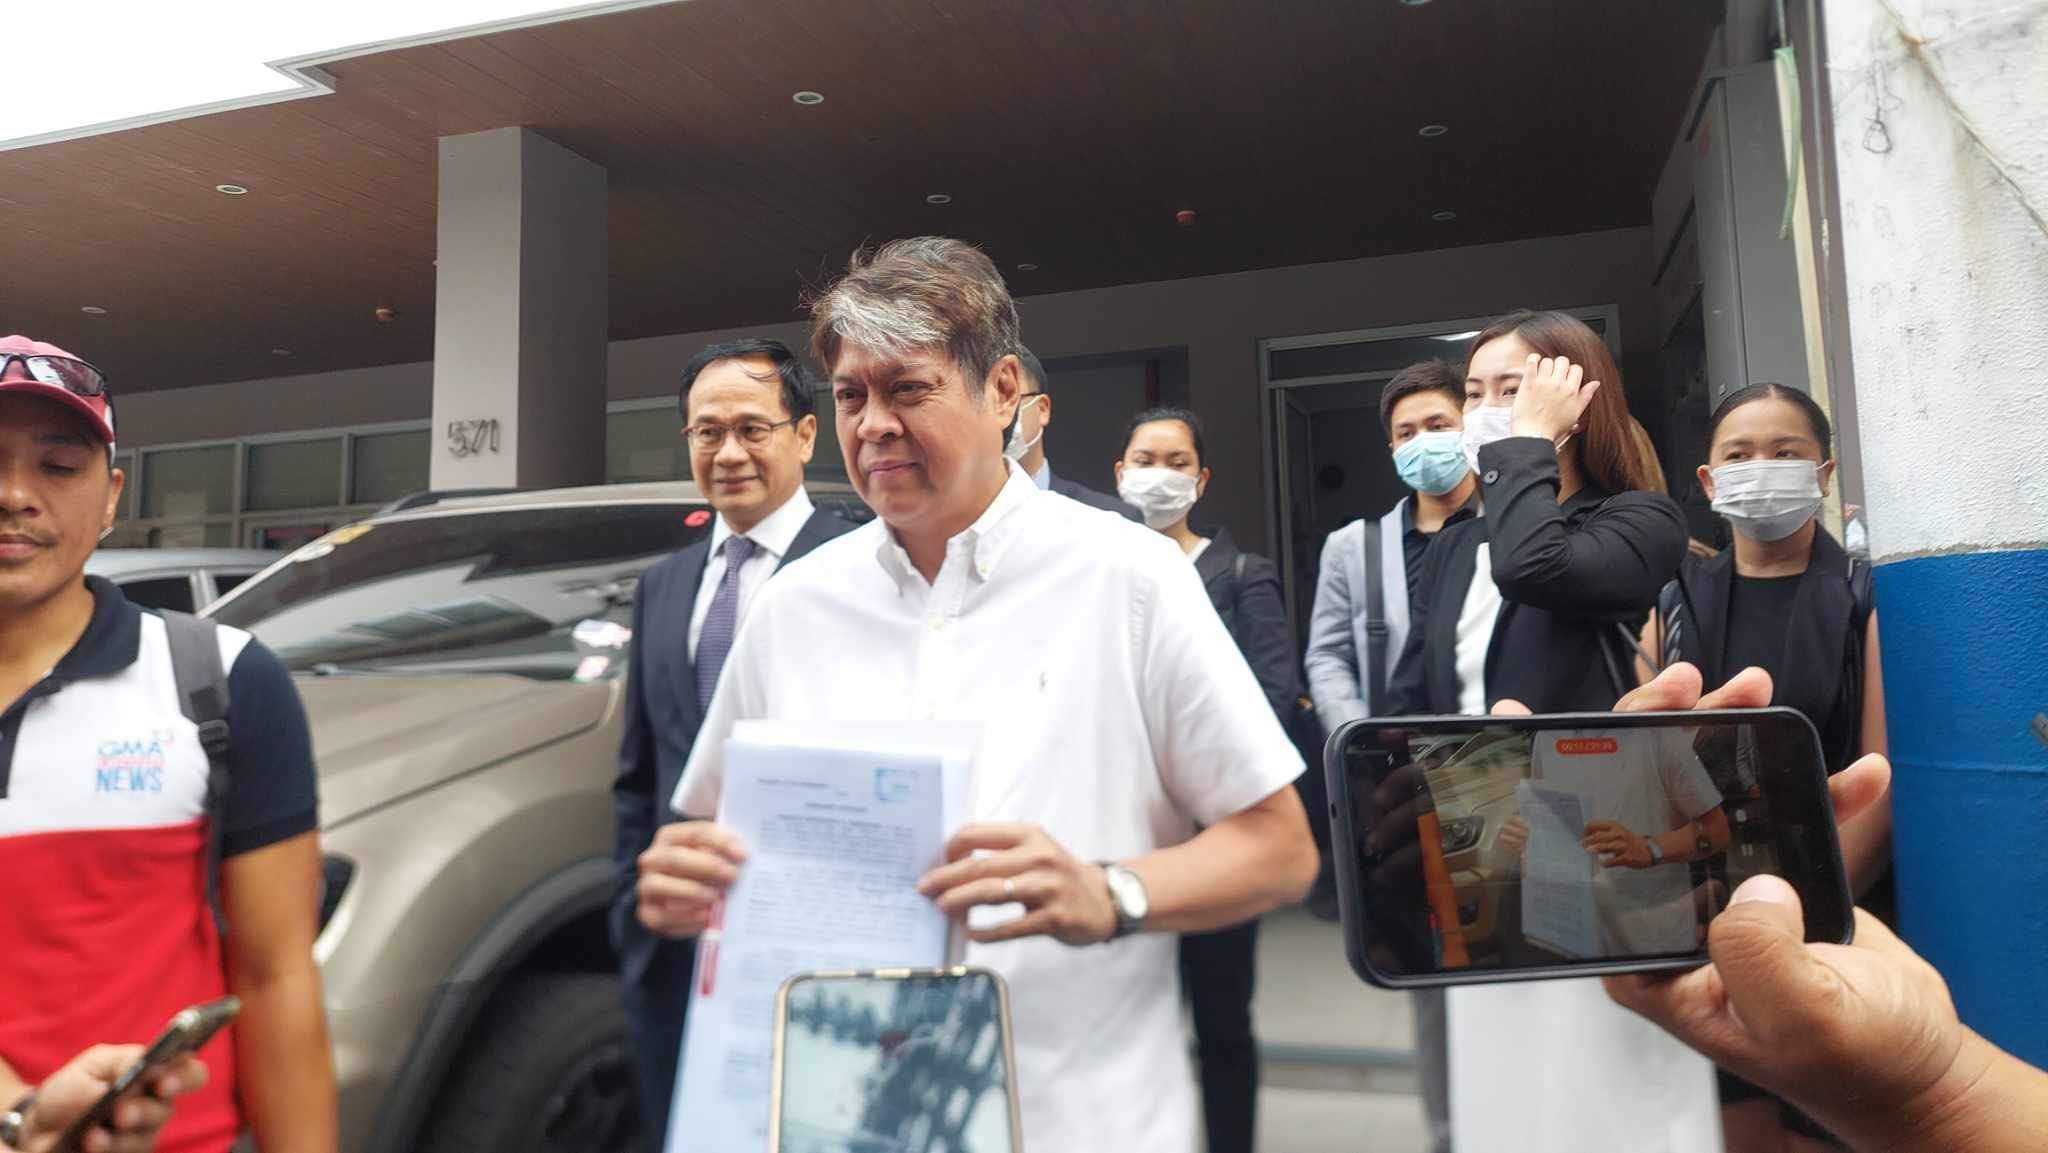 Kiko Pangilinan files cyberlibel charges vs. YouTube channel for uploading maligning videos